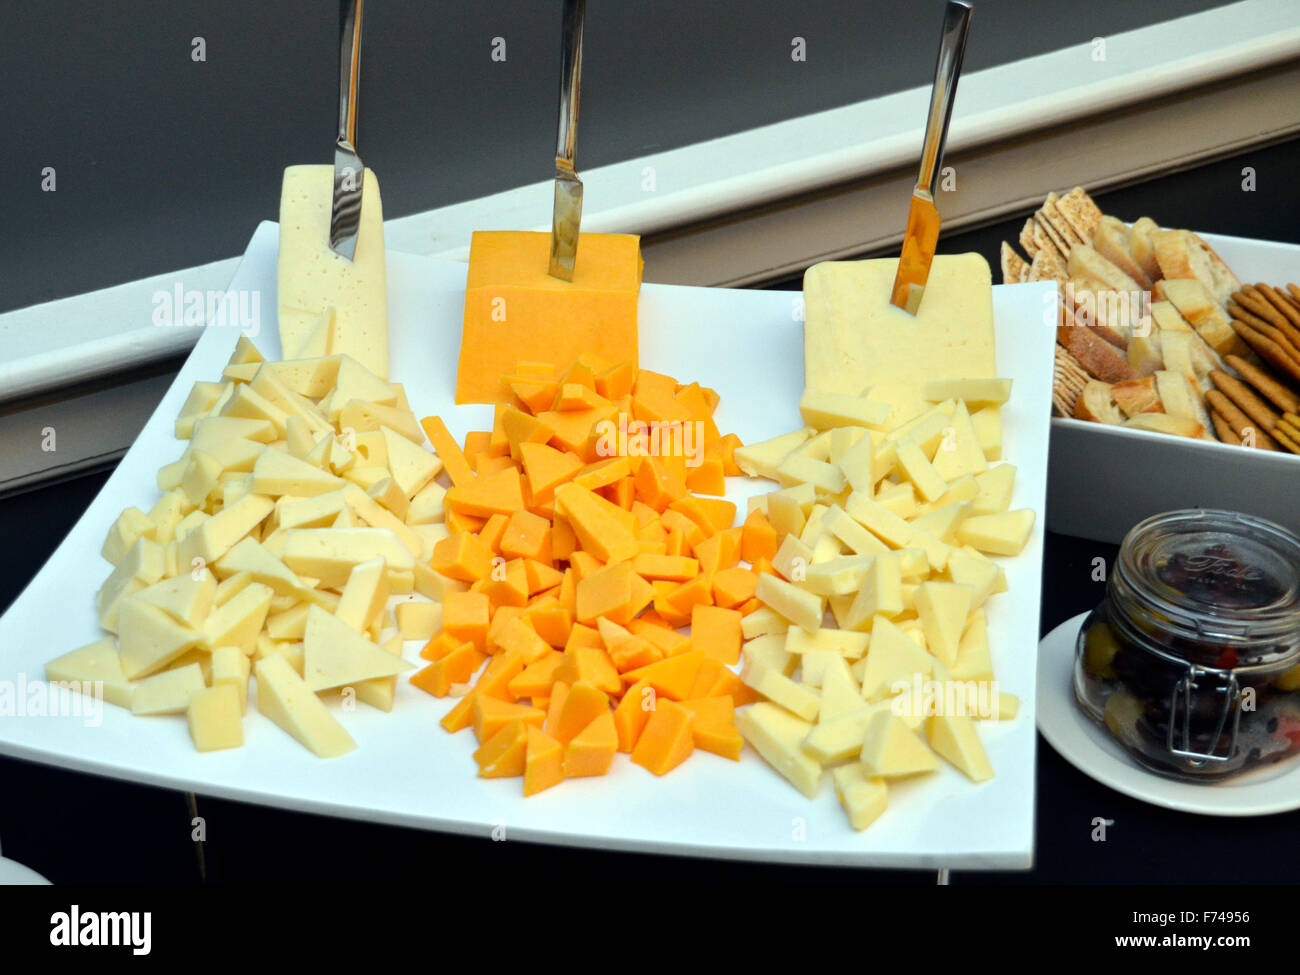 Plate full of a variety of cheese Stock Photo